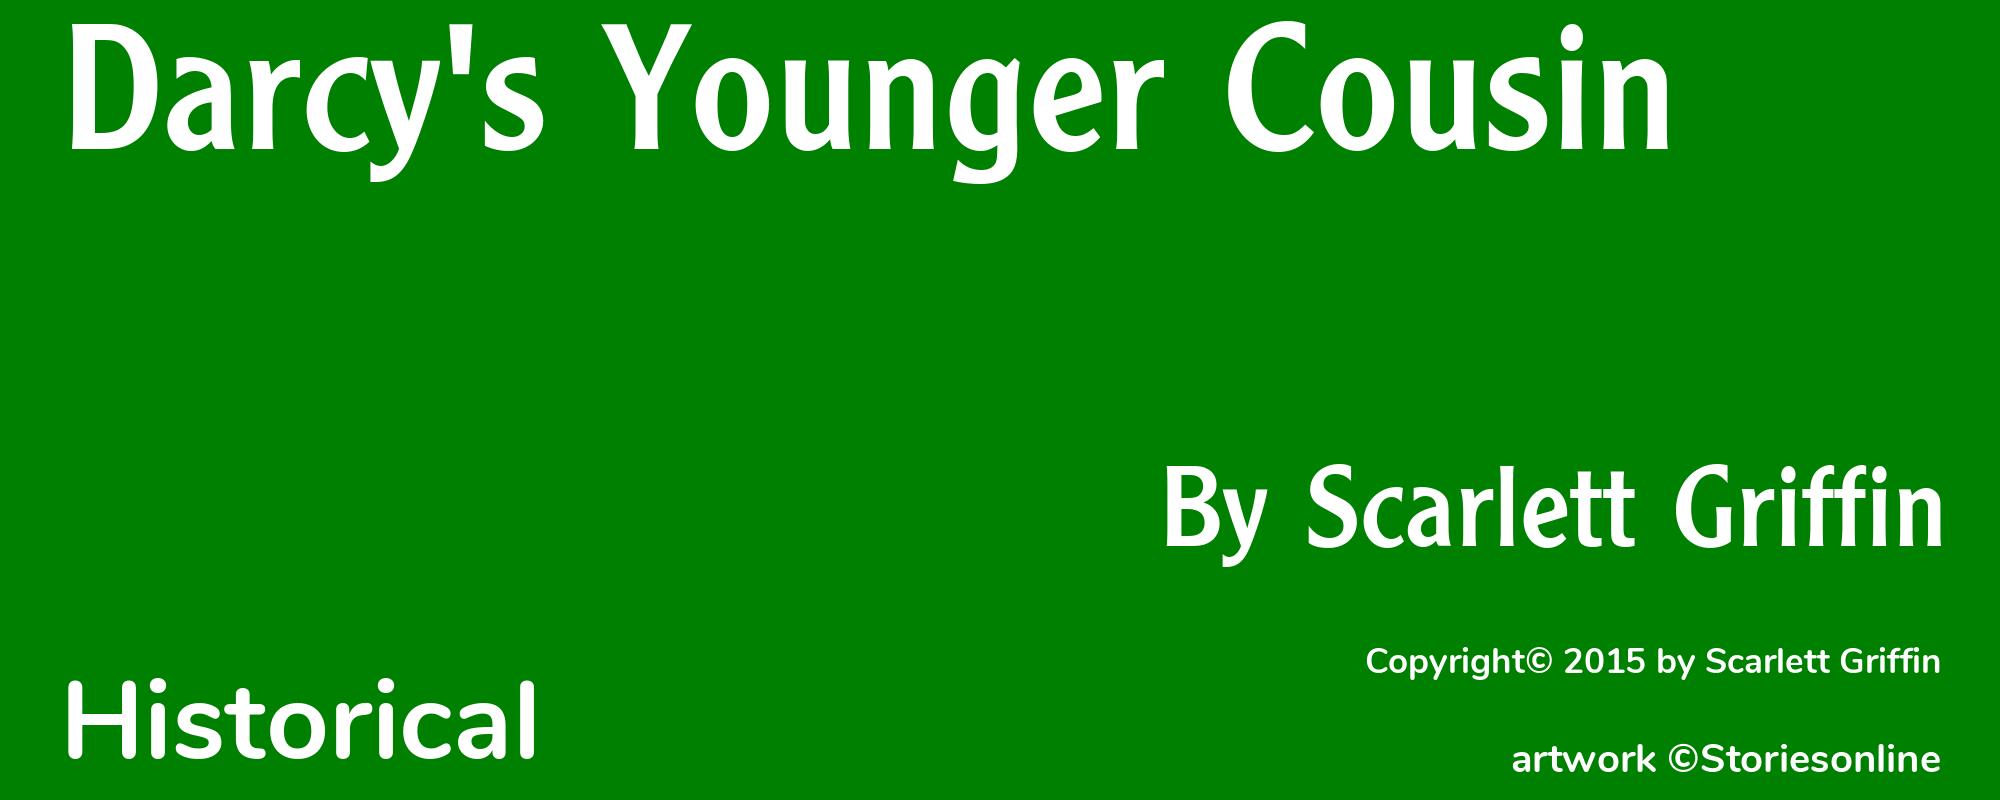 Darcy's Younger Cousin - Cover